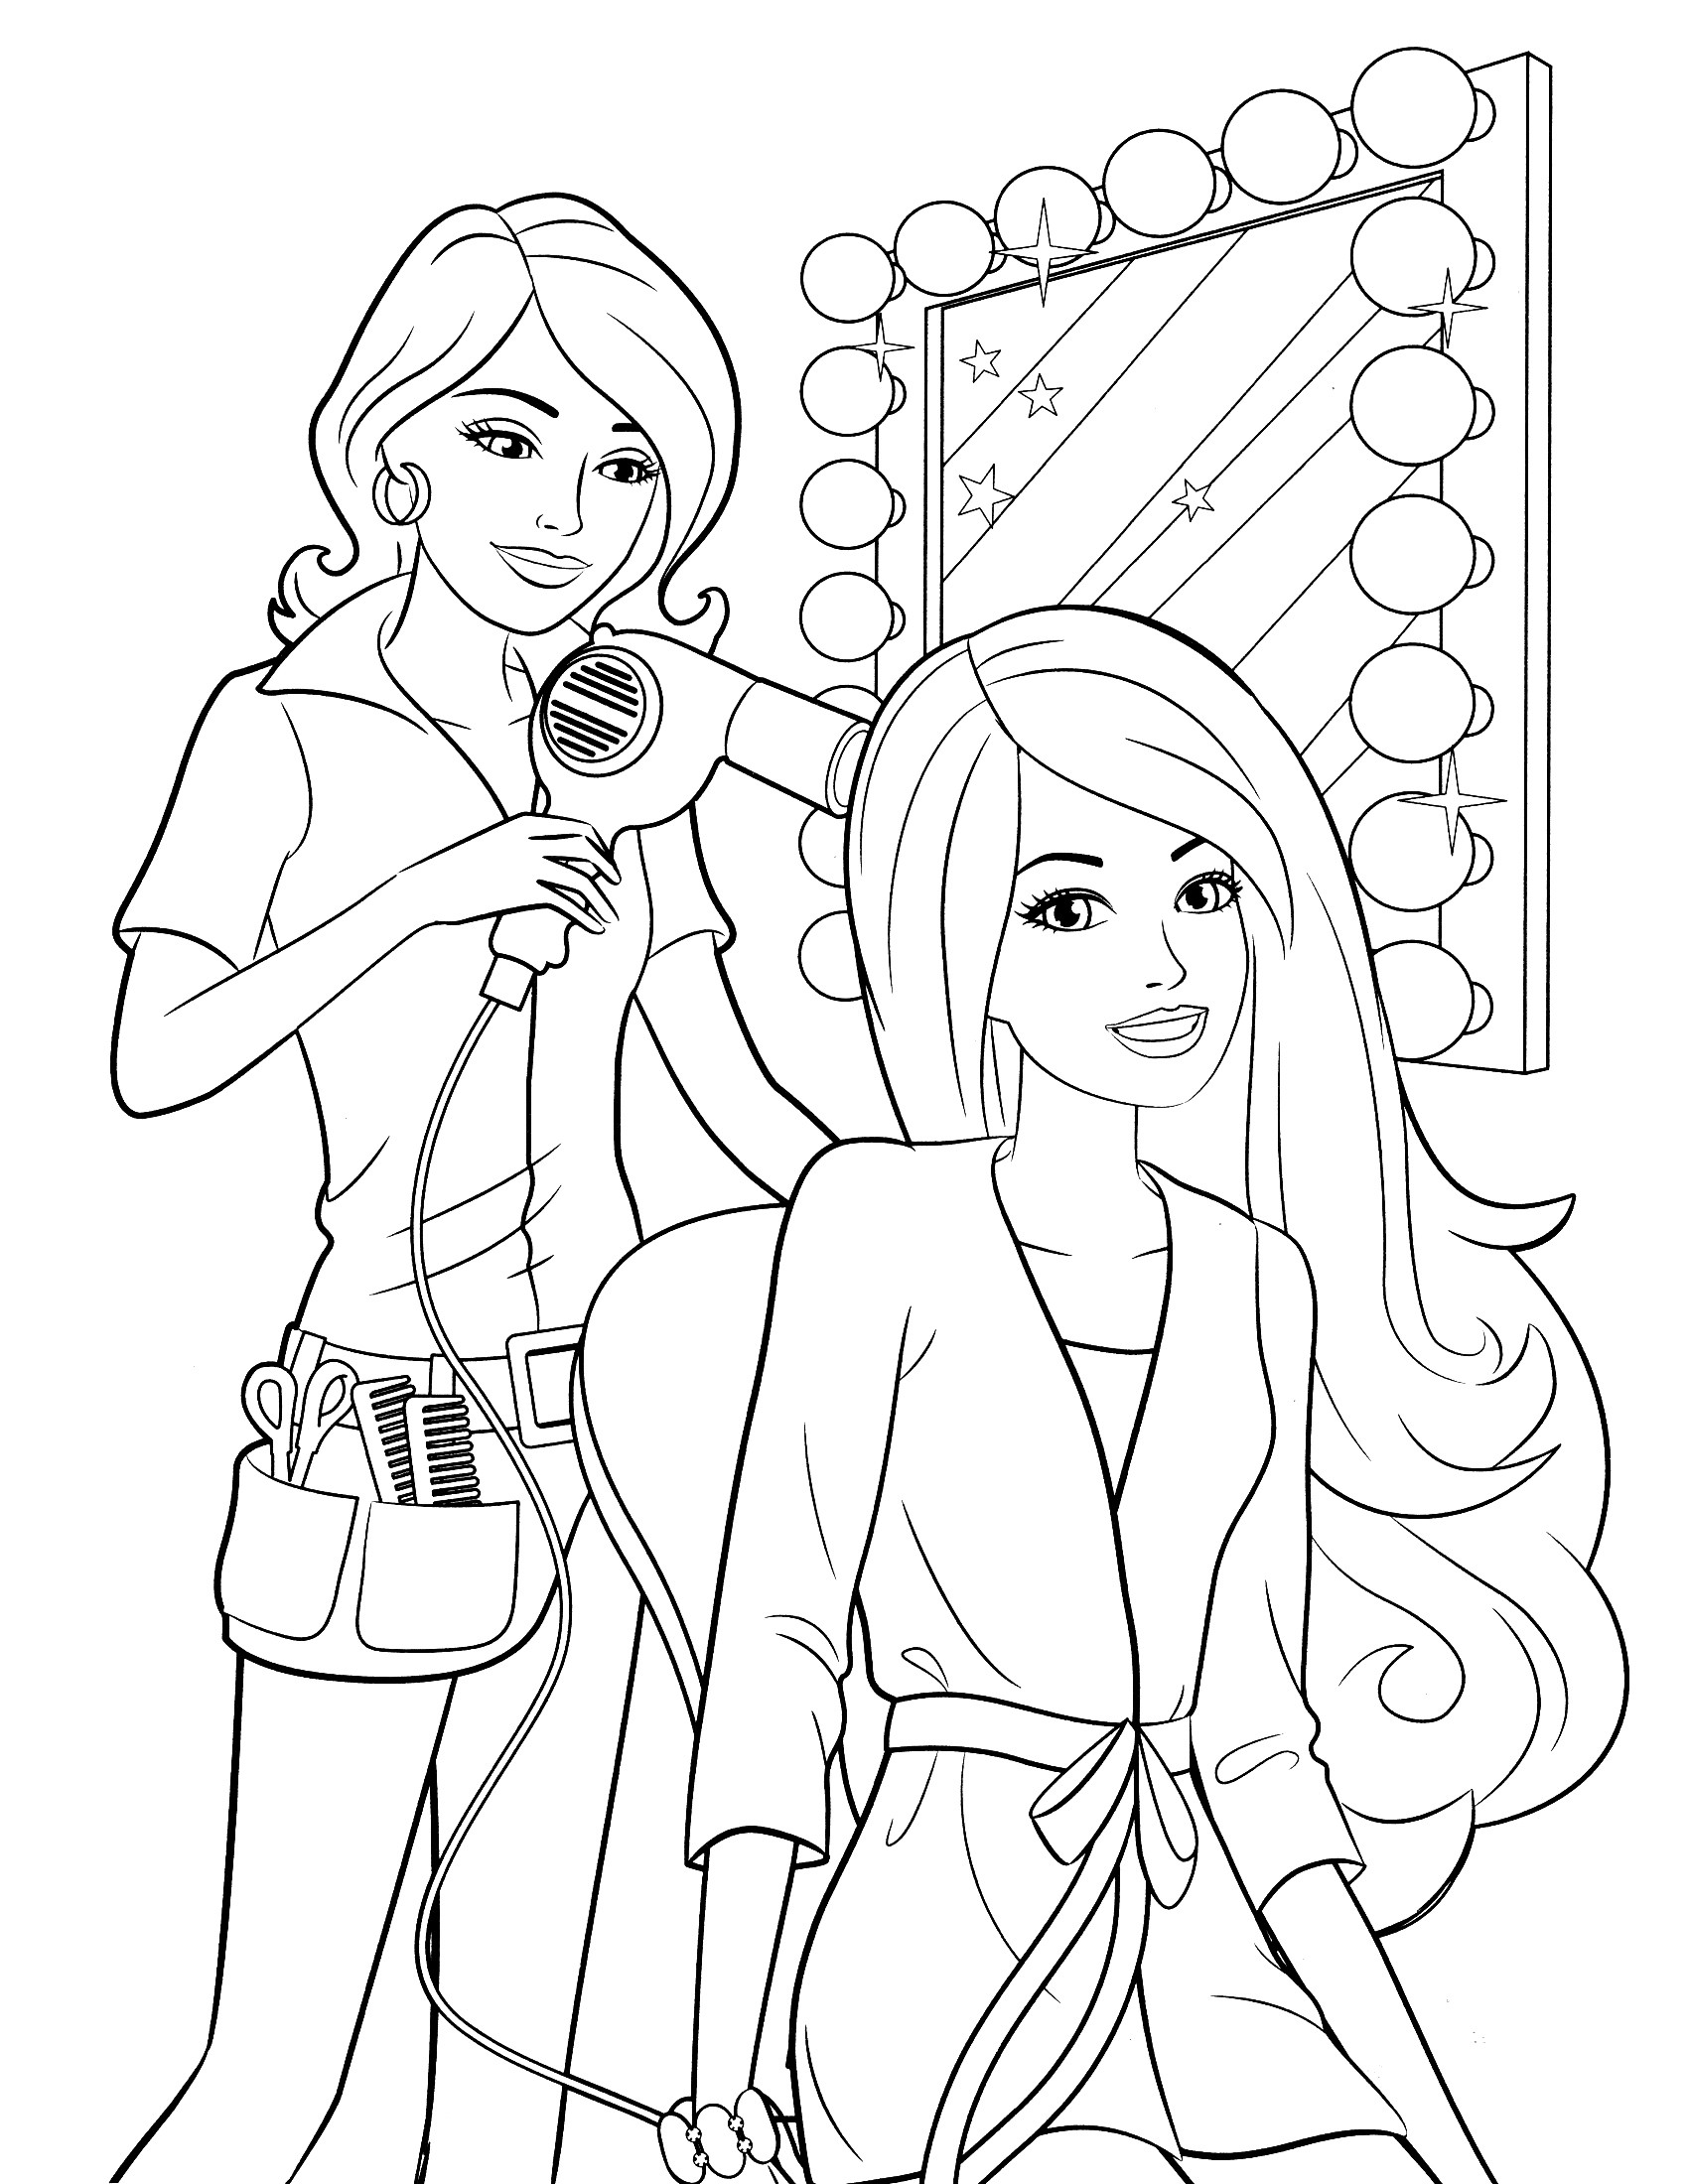 Barbie Coloring Pages For Girls
 Barbie coloring pages for girls timeless miracle